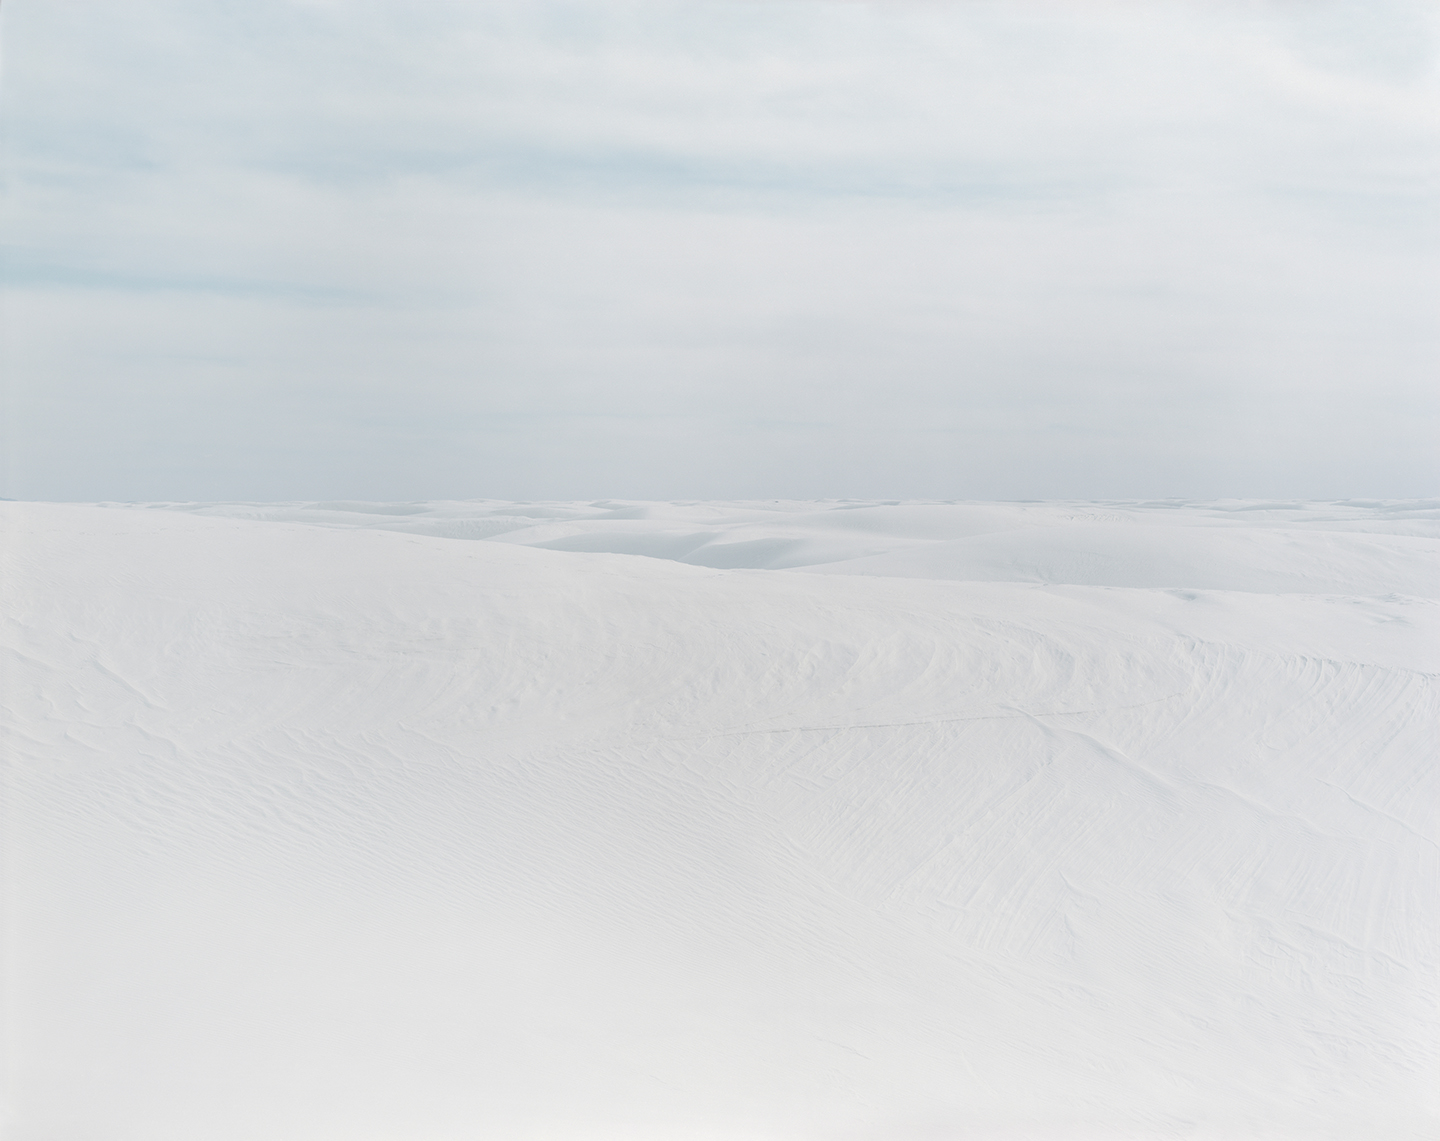  Dunes at White Sands, New Mexico, 2012 